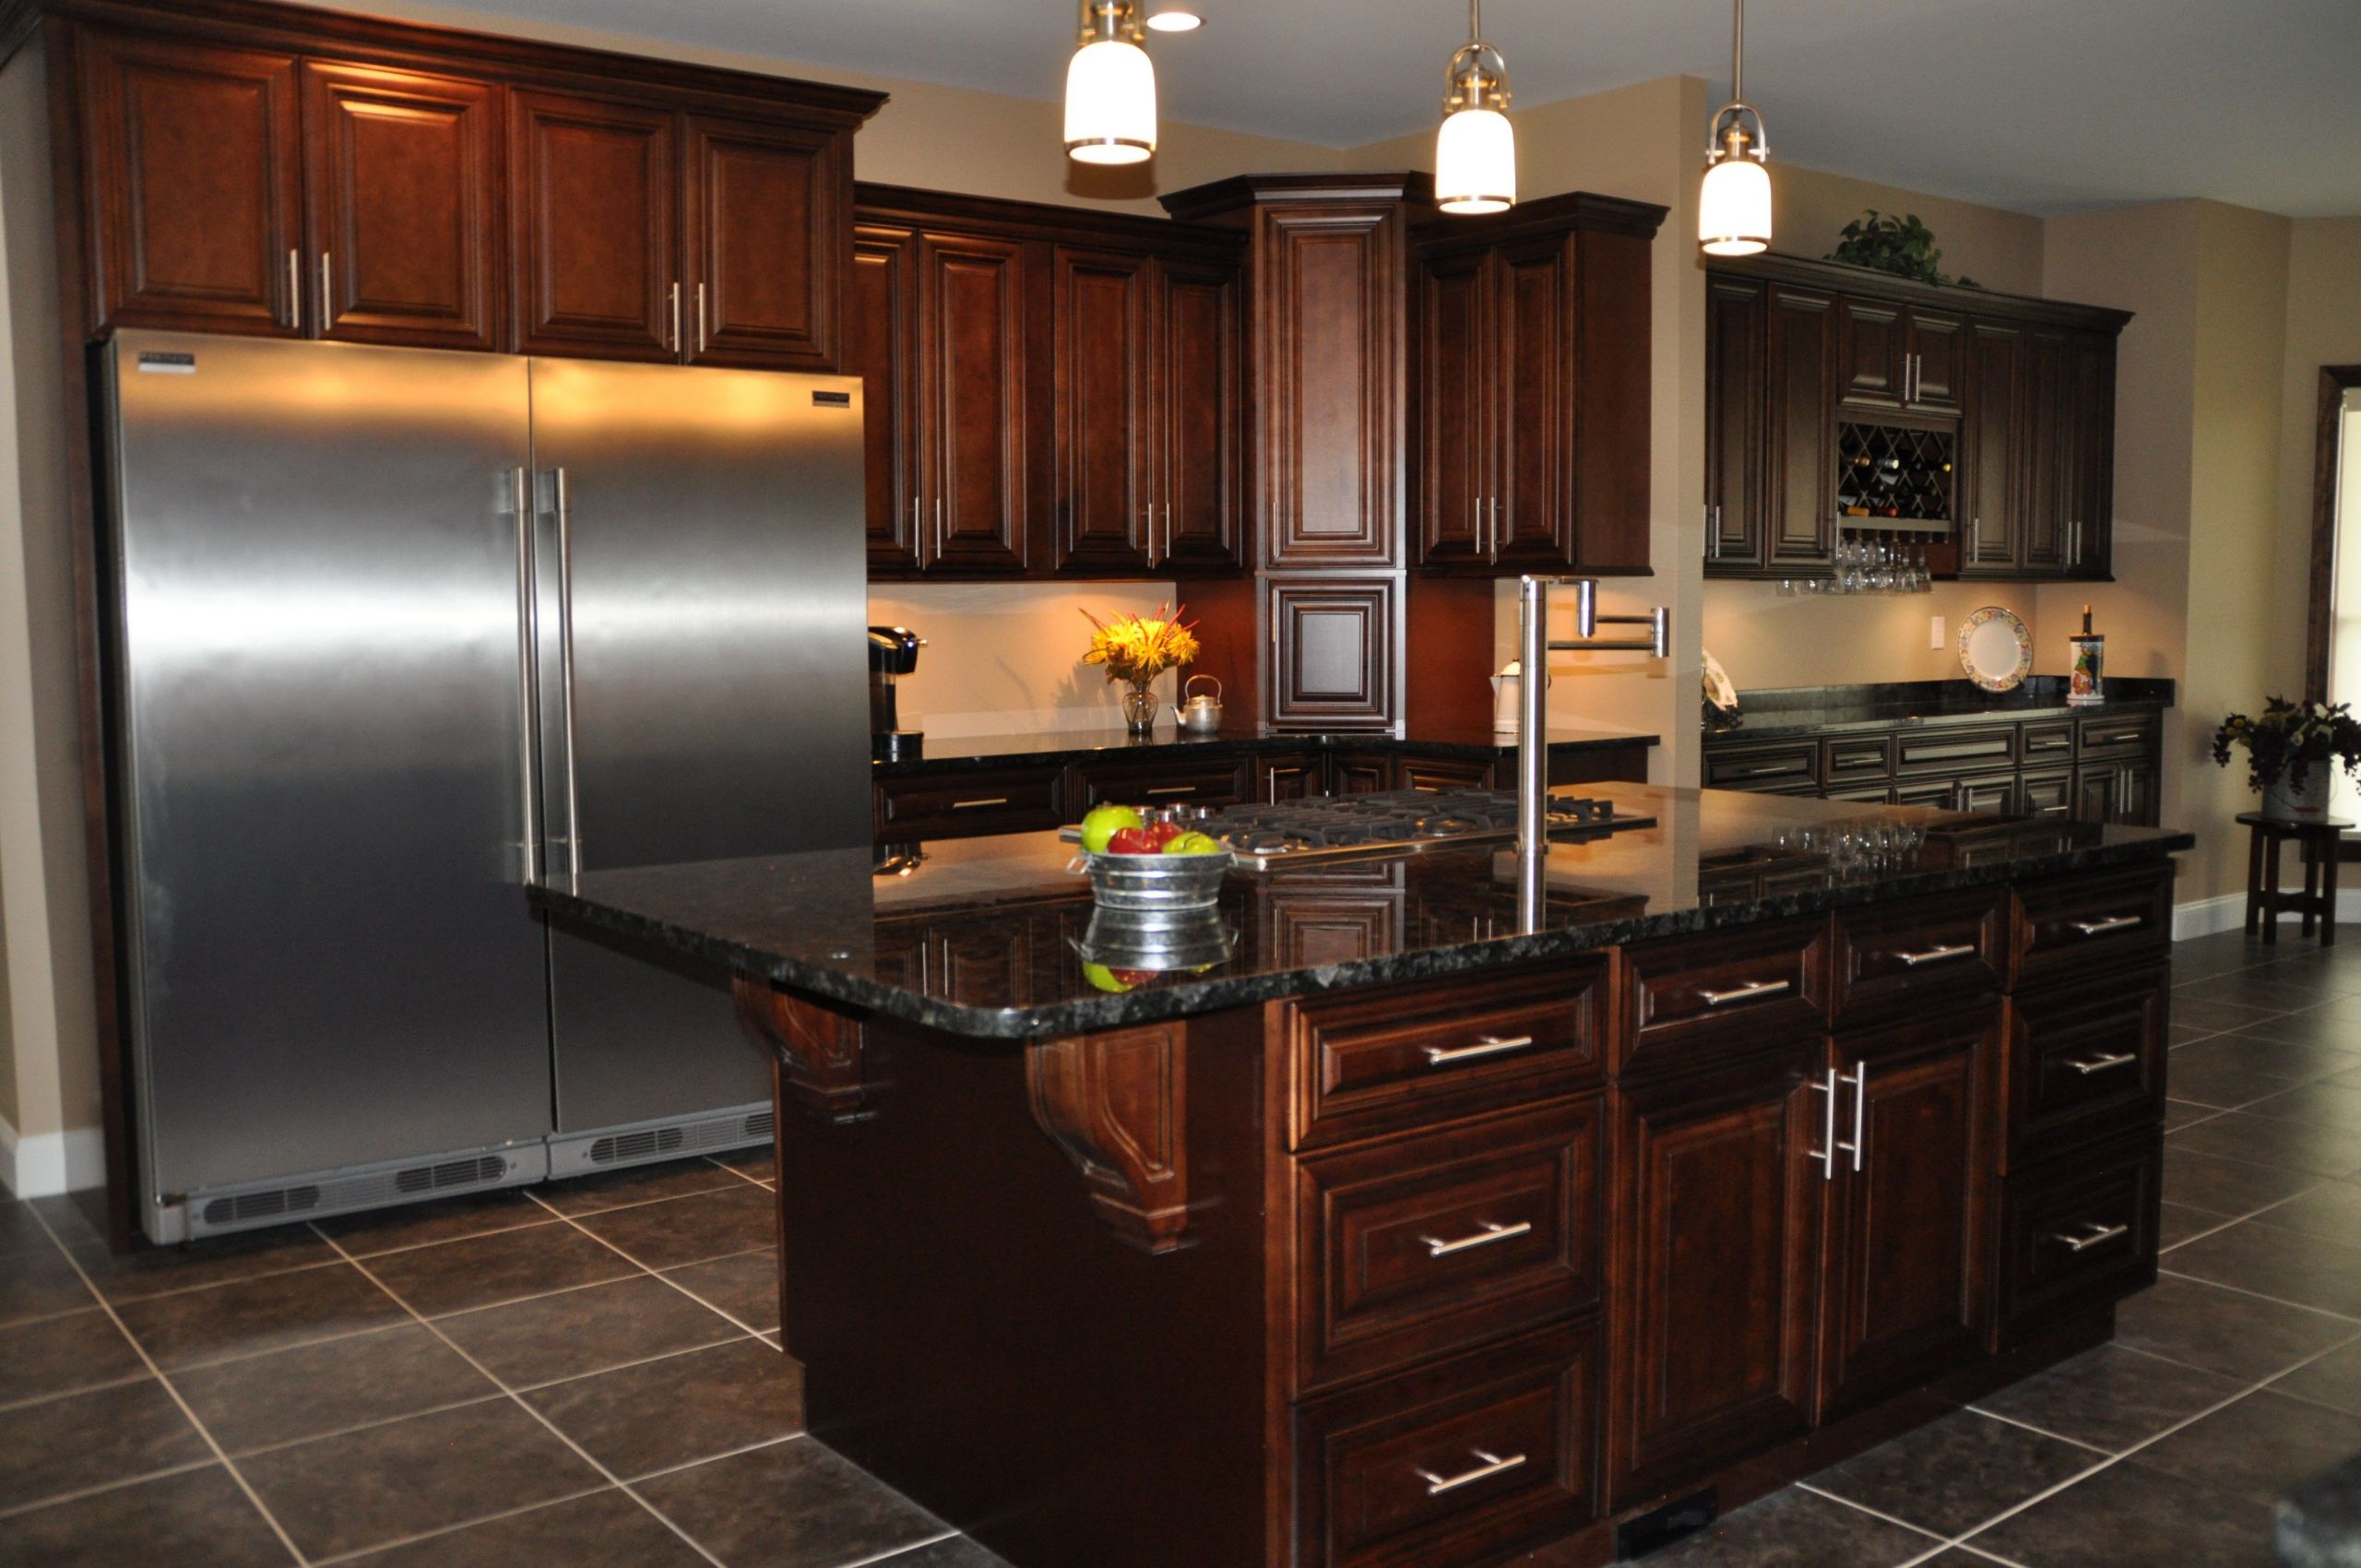 Bargain Outlet Kitchen Cabinets
 I found that Bargain Outlet had the best product for the